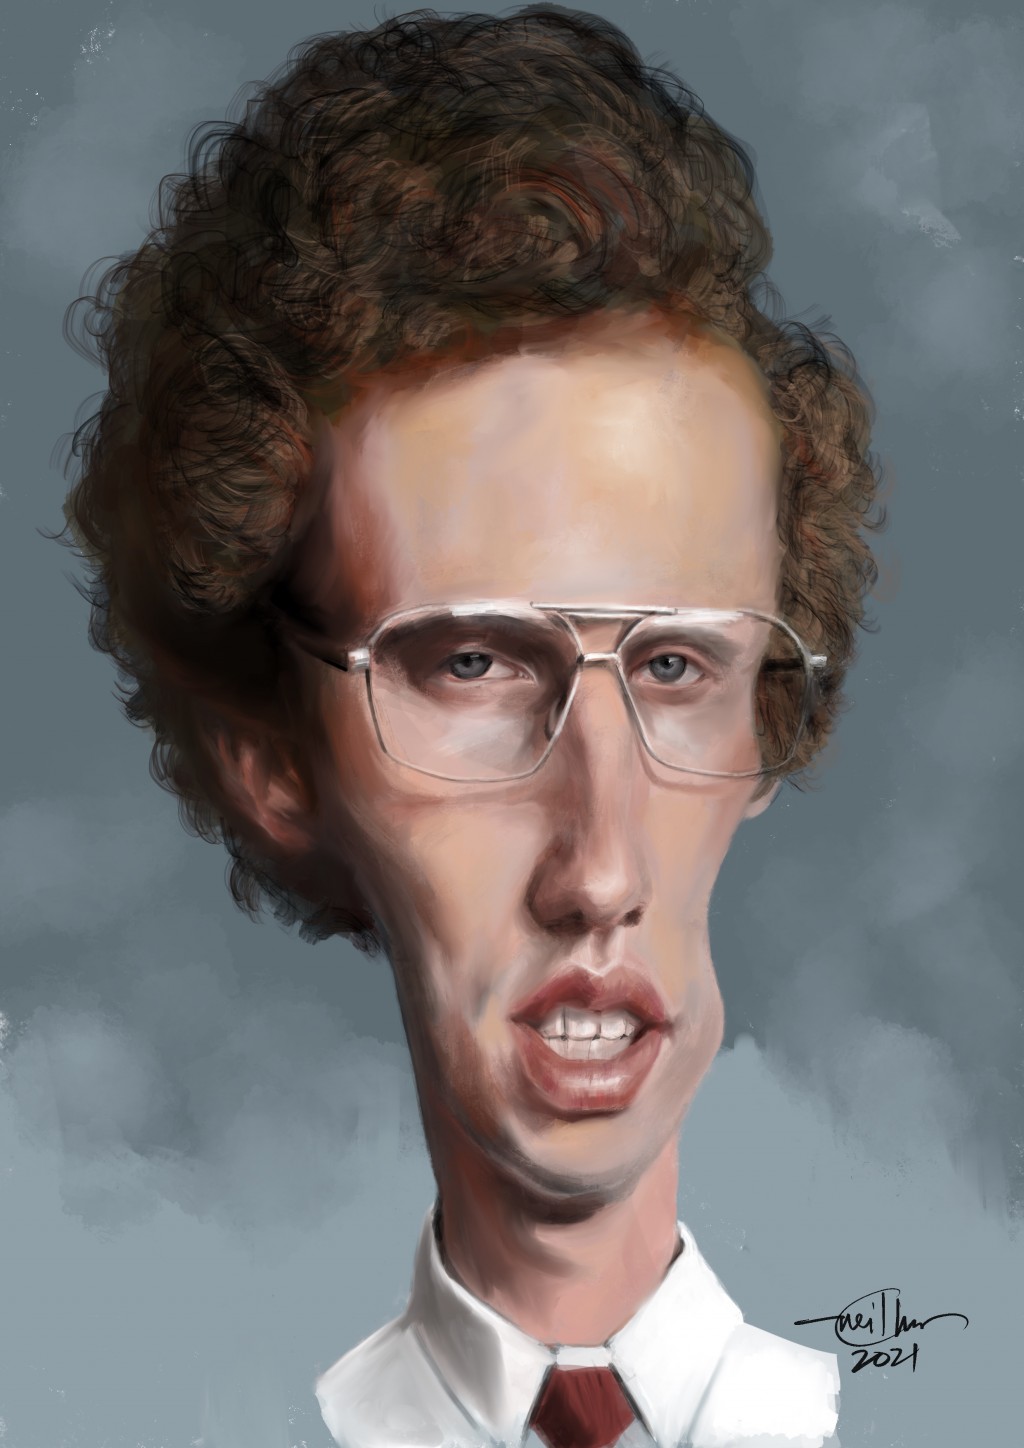 Painting fanart Napoleon Dynamite drawing by Neil Anoba Doodle Addicts